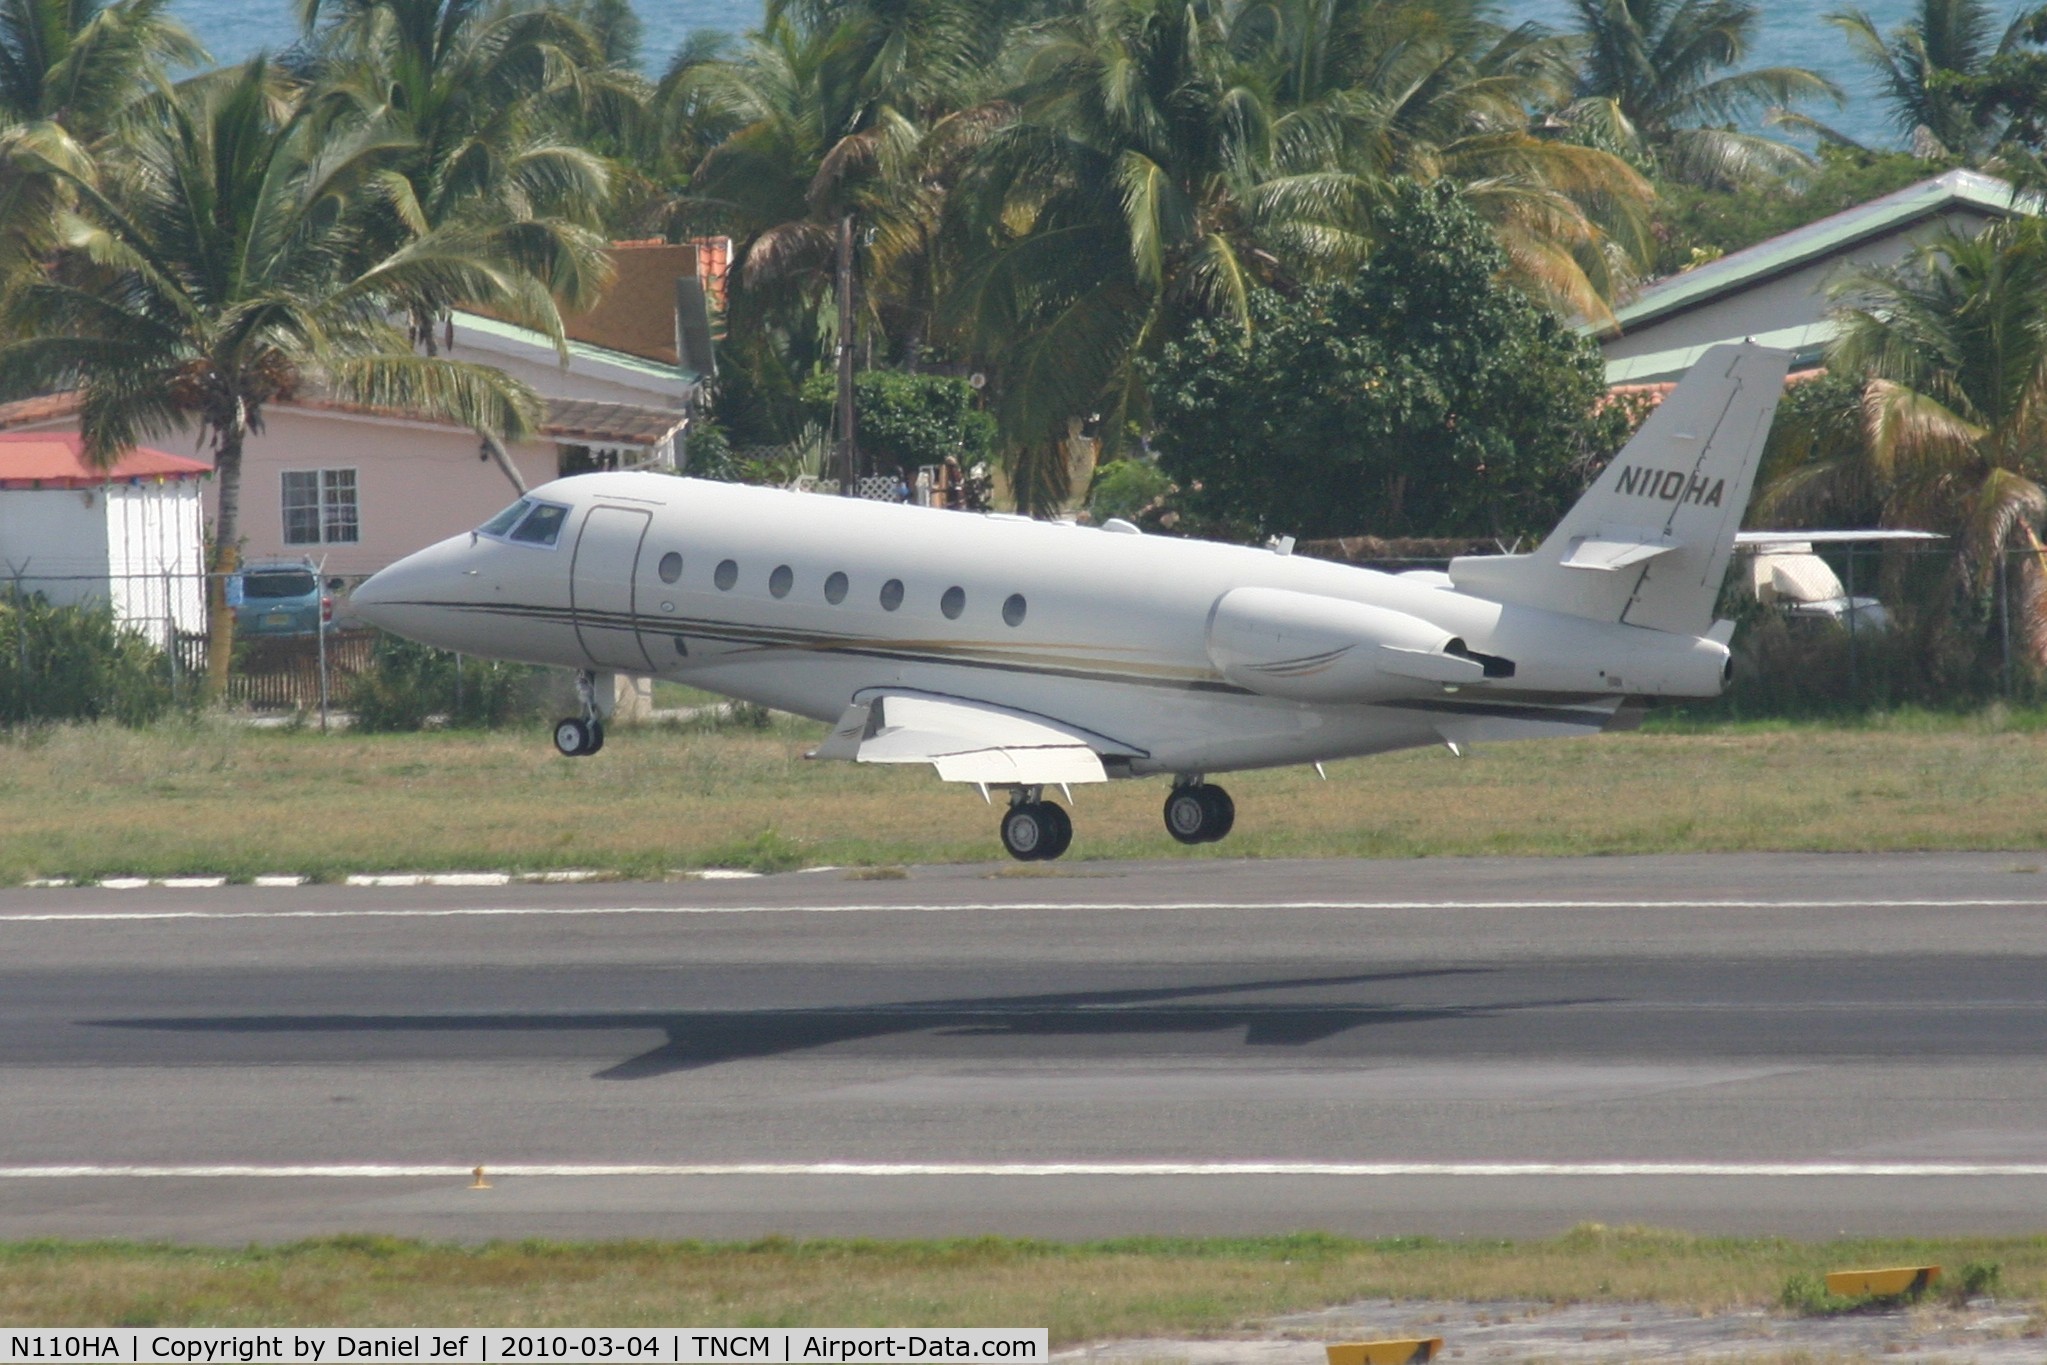 N110HA, 2001 Israel Aircraft Industries Gulfstream 200 C/N 035, N110HA just aout to touch down at TNCM